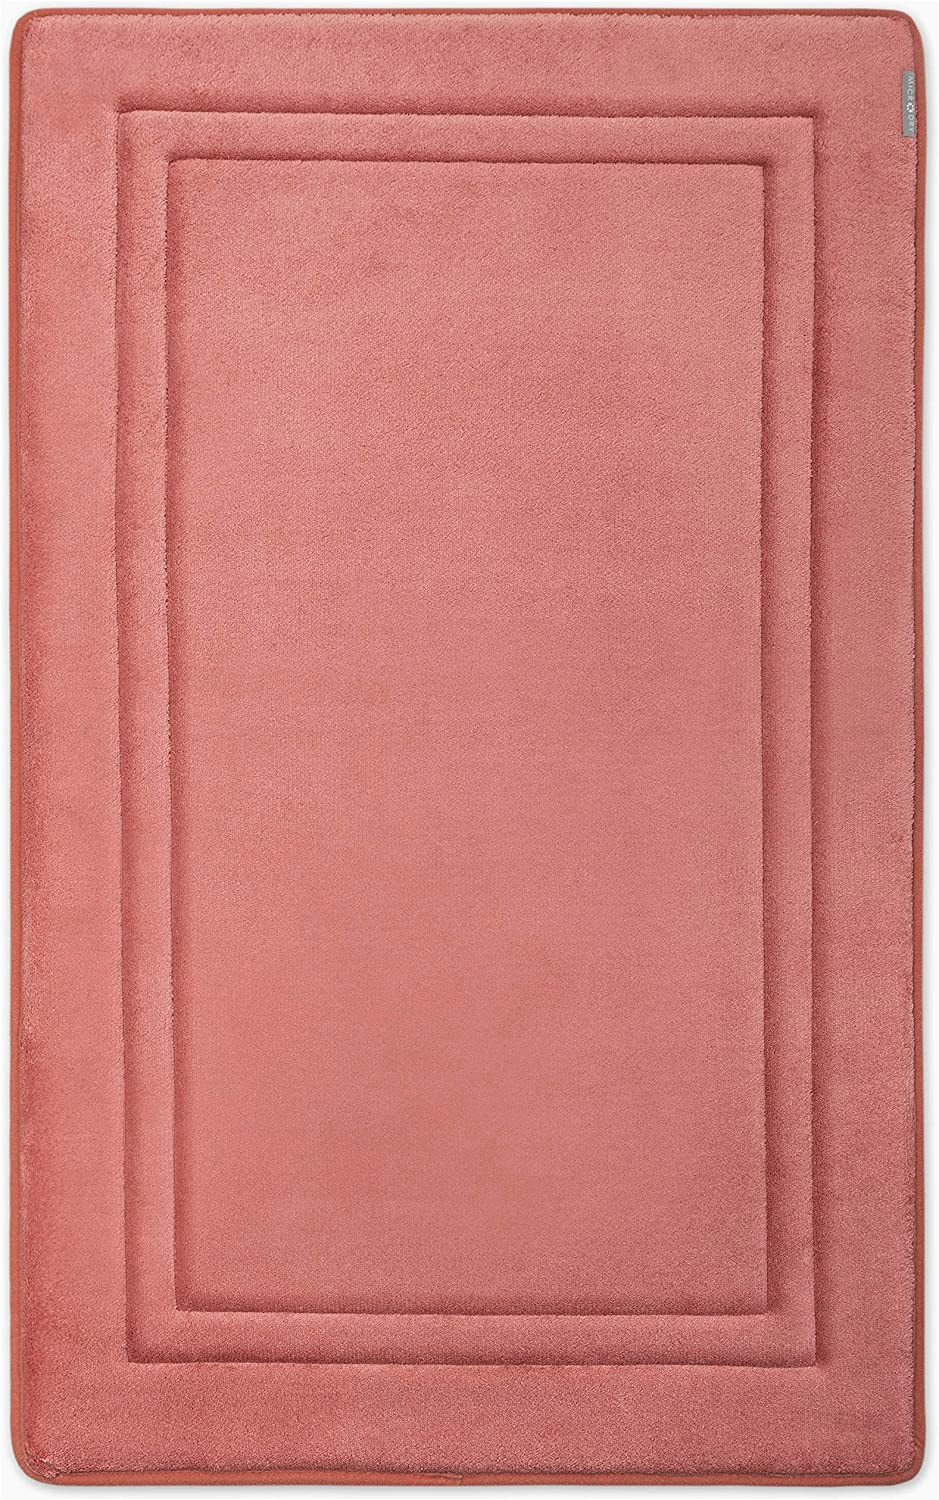 Skid Resistant Bath Rugs Microdry Quick Drying Memory Foam Framed Bath Mat with Griptex Skid Resistant Base 21×34 ash Rose